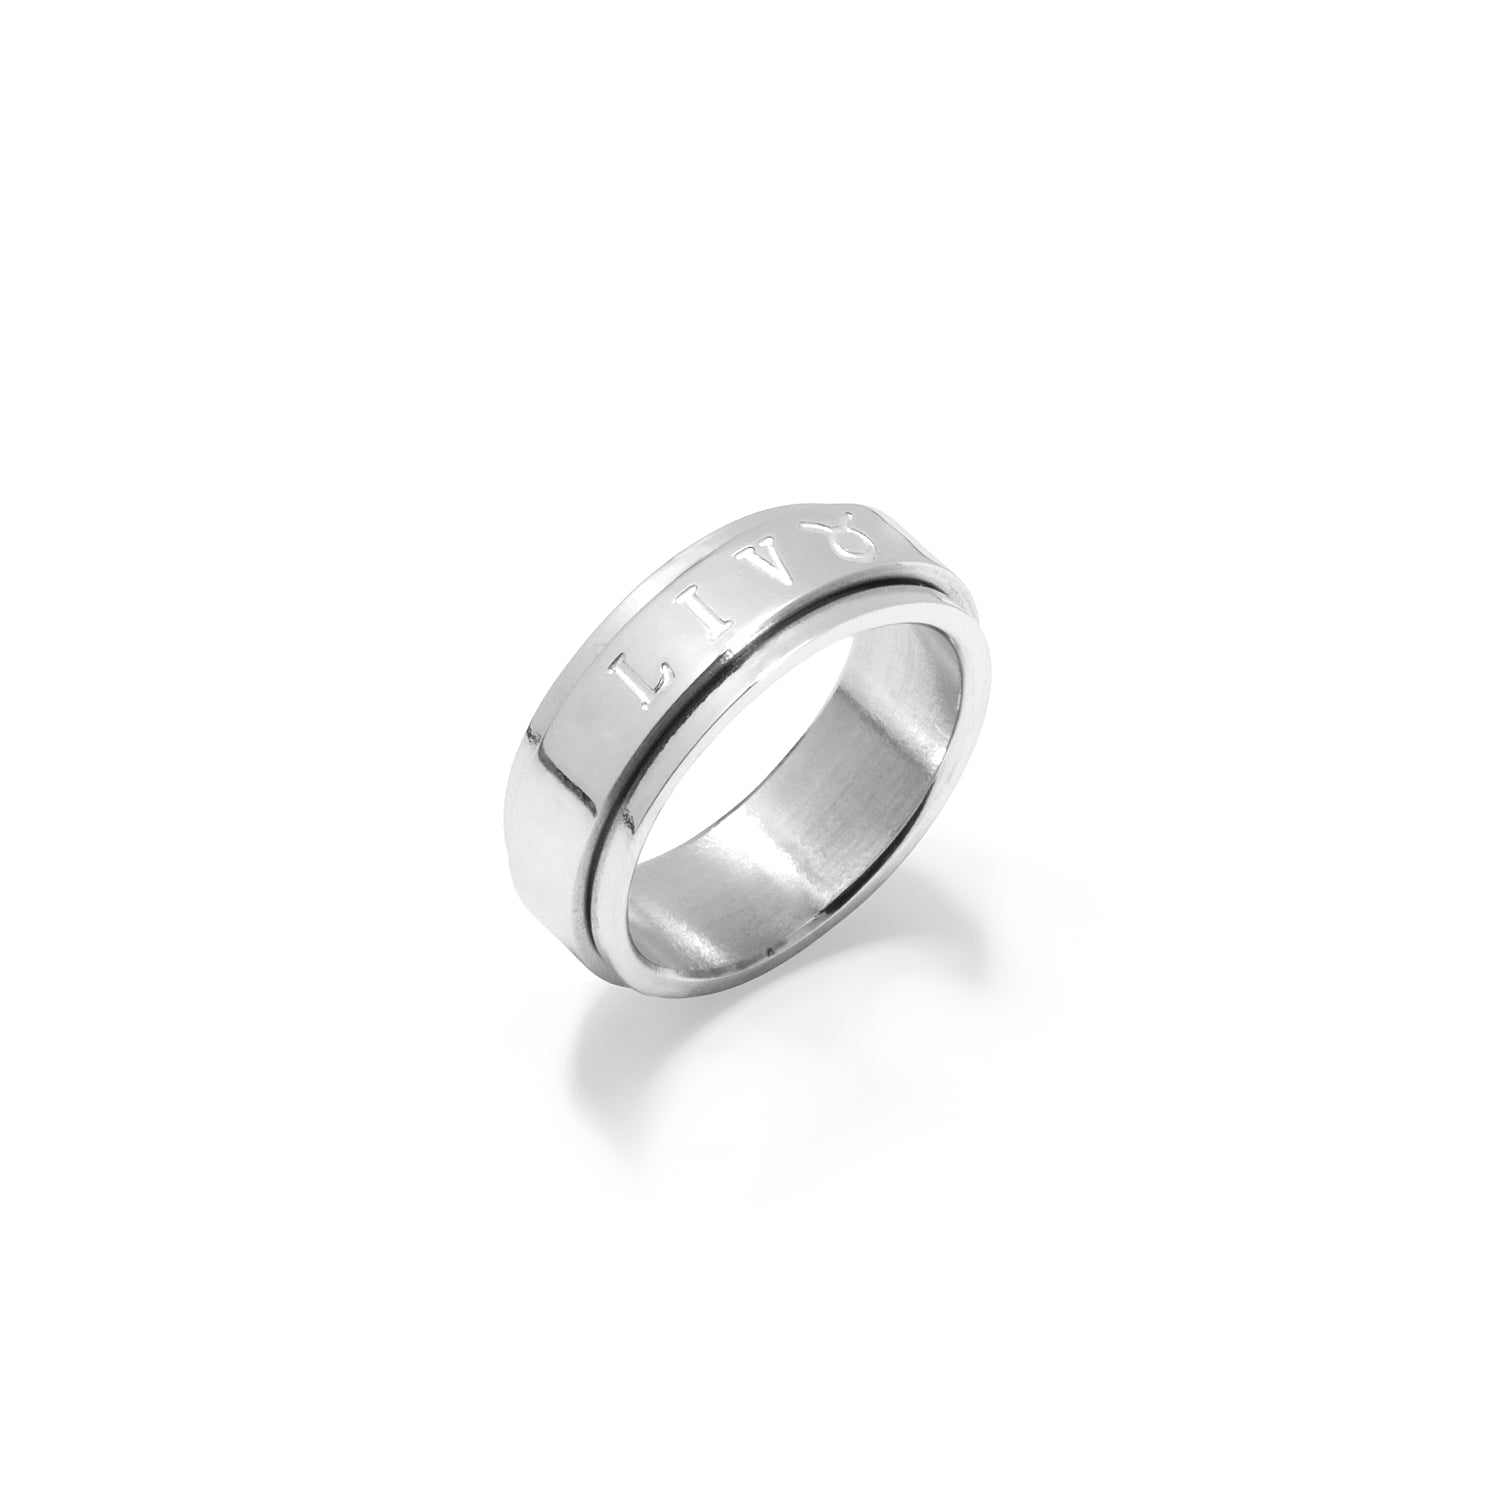 Disc Ring Sterling Silver Ring Round Smooth Top Ring 925 